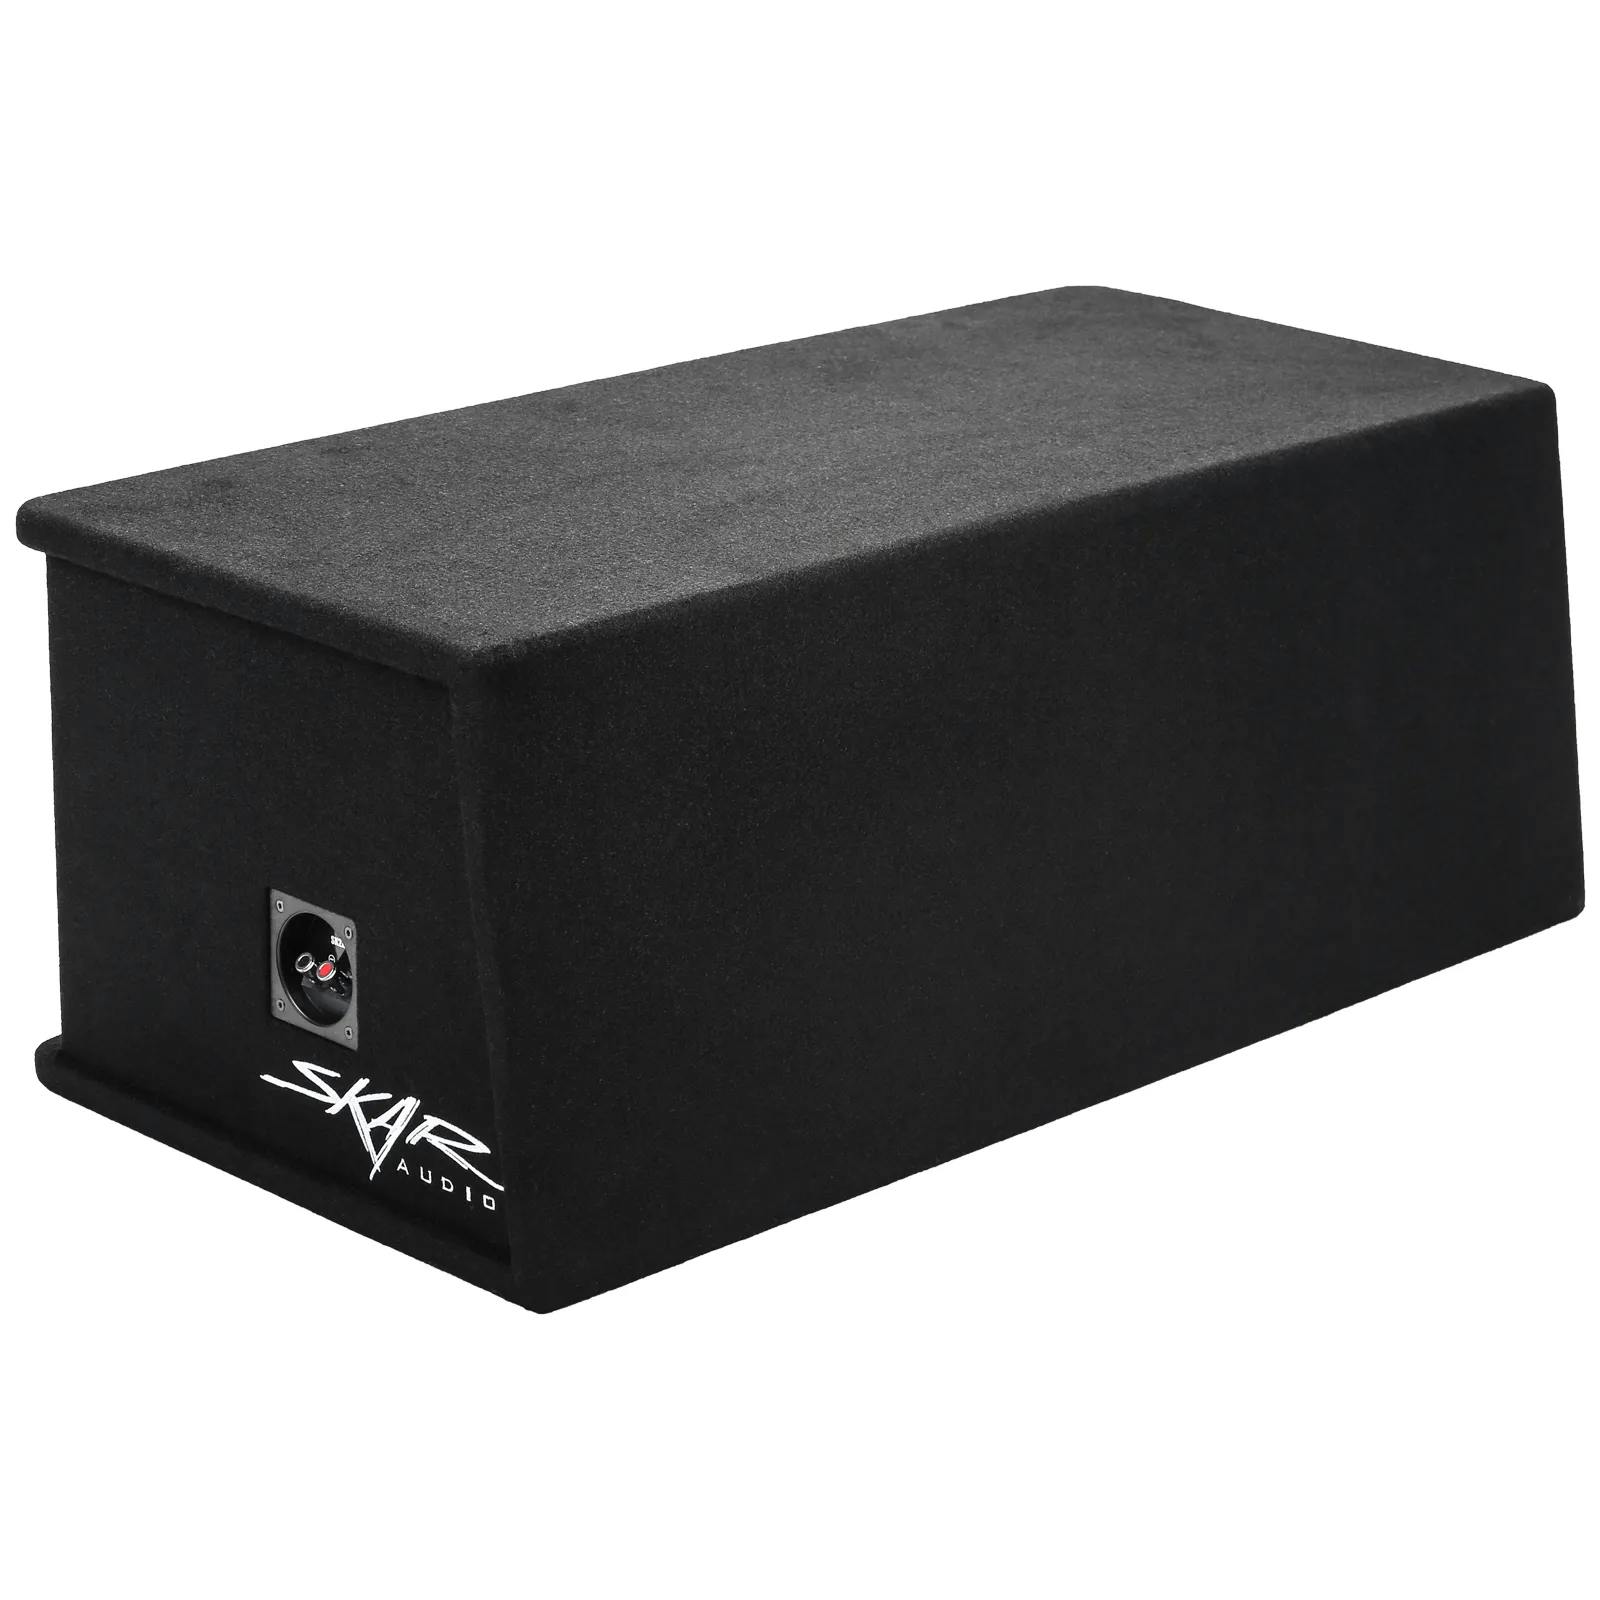 Featured Product Photo 3 for Dual 12" Ported Subwoofer Enclosure